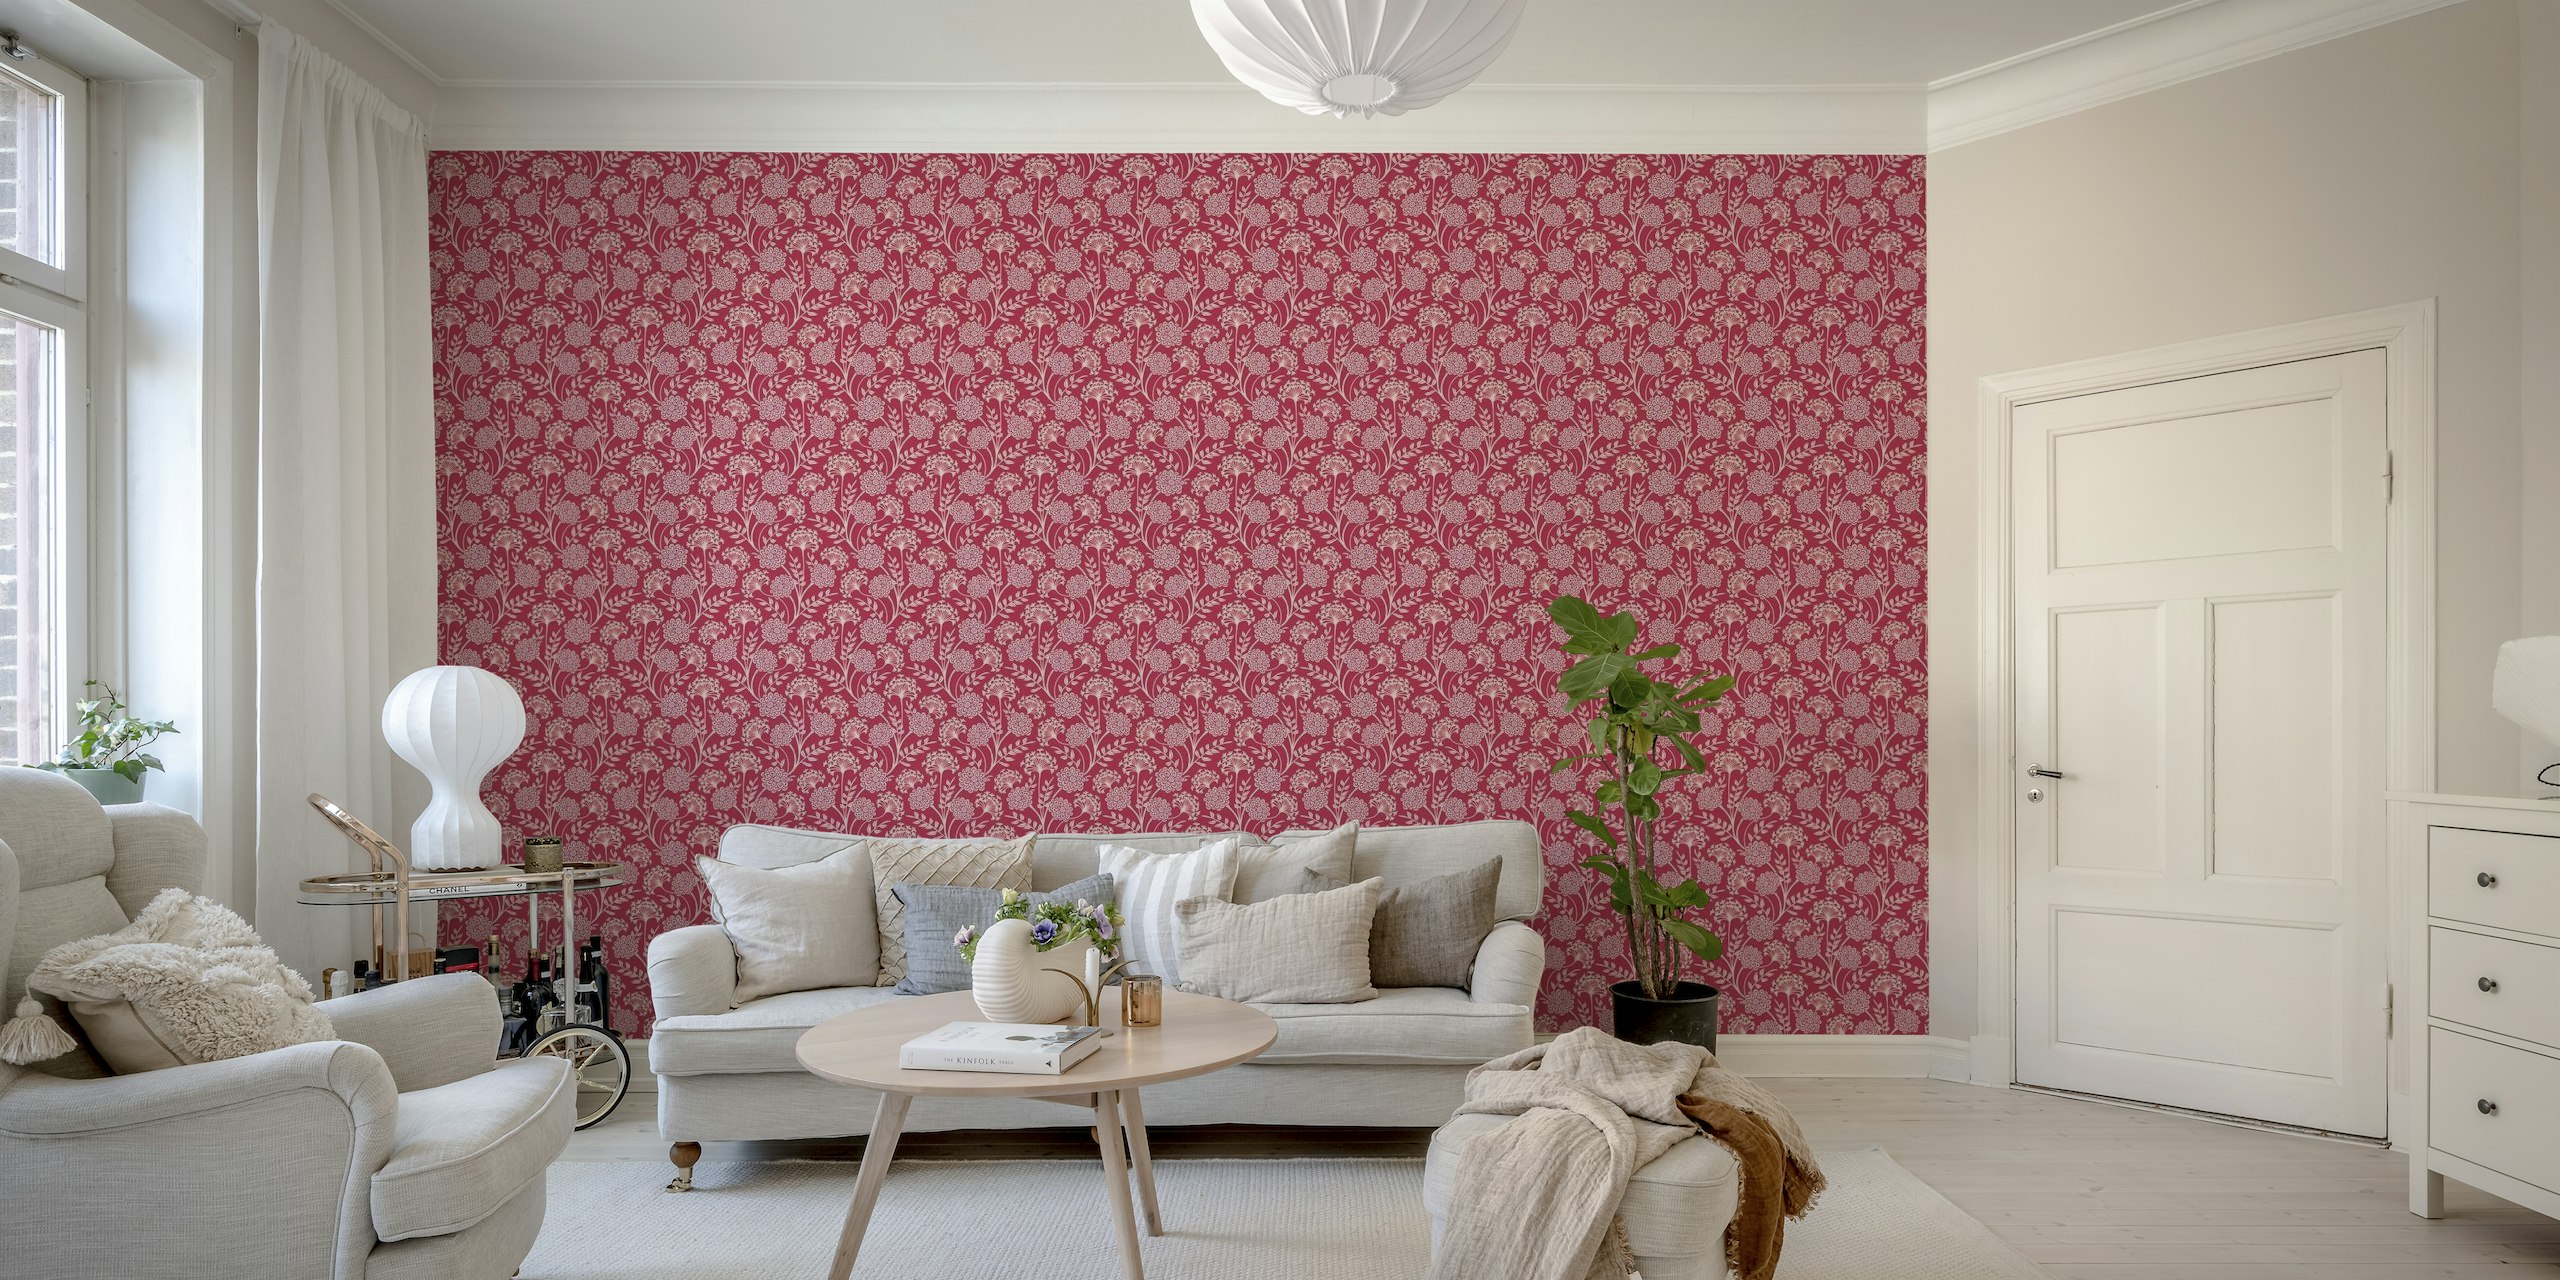 DANUBE Cottage Floral wall mural in magenta red with white floral patterns